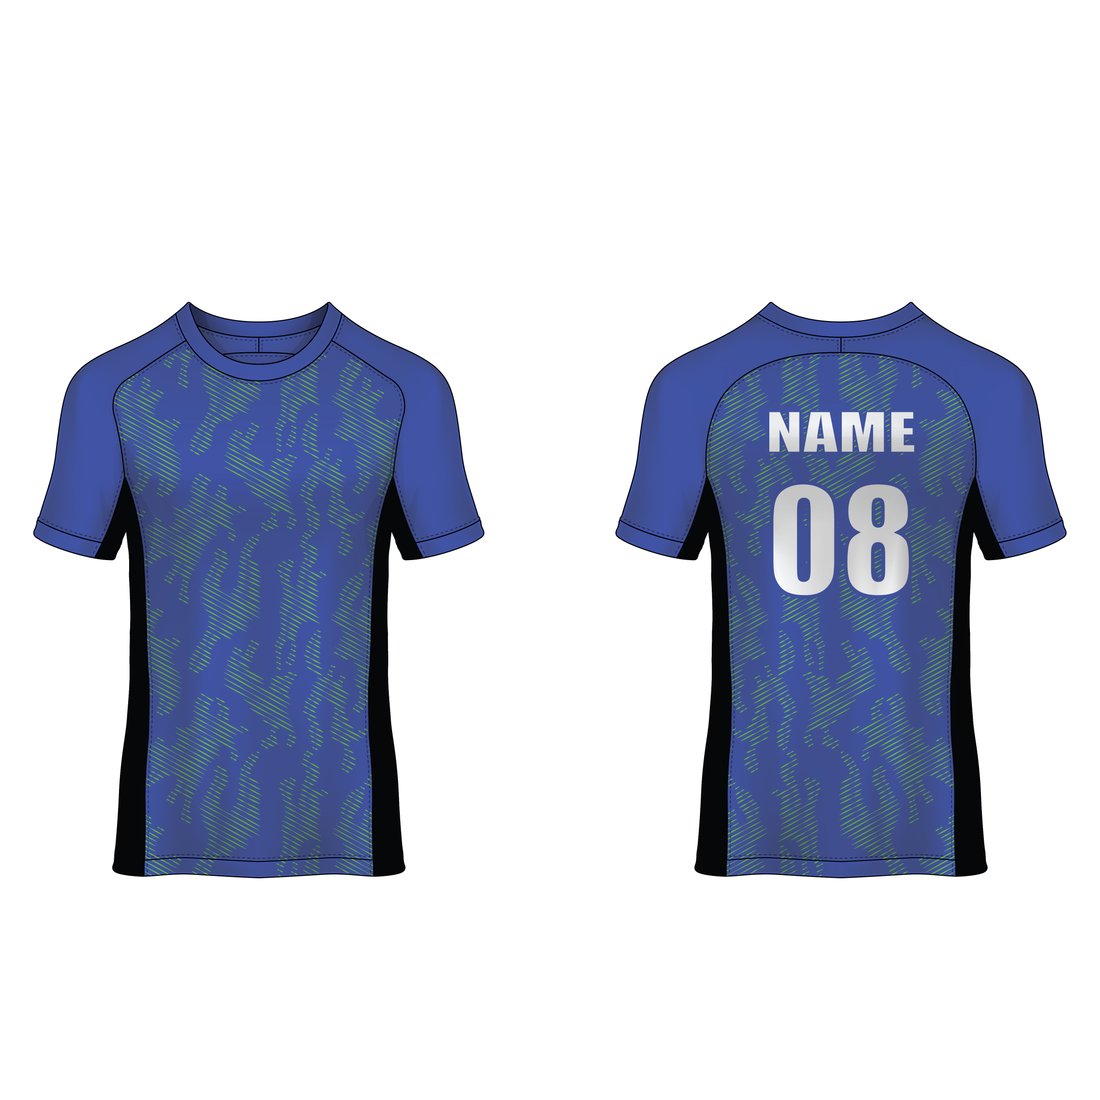 NEXT PRINT All Over Printed Customized Sublimation T-Shirt Unisex Sports Jersey Player Name & Number, Team Name NP50000273